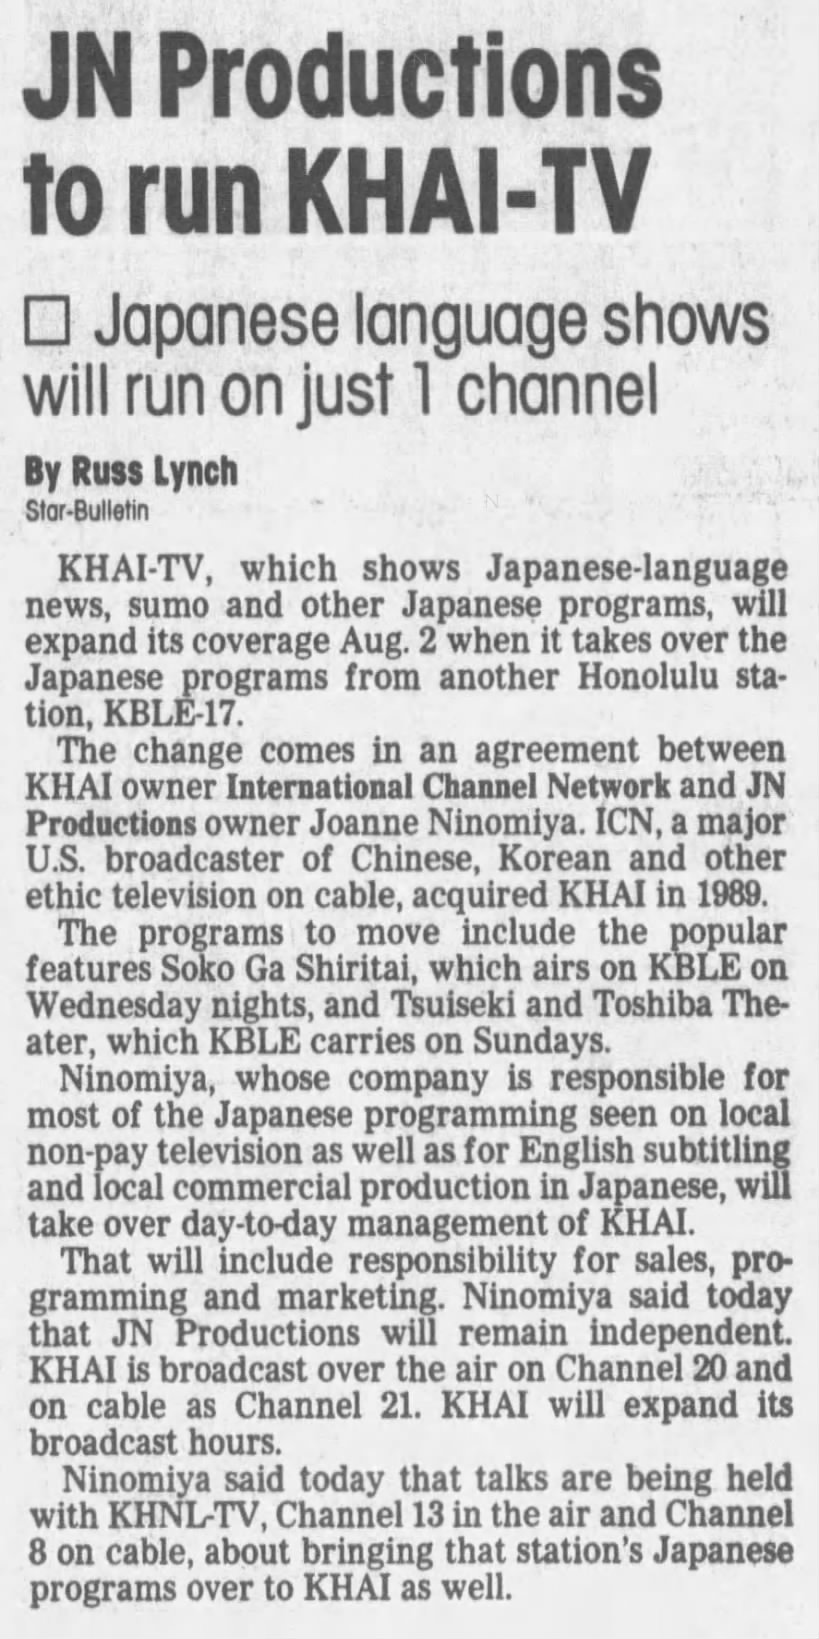 JN Productions to run KHAI-TV: Japanese language shows will run on just 1 channel